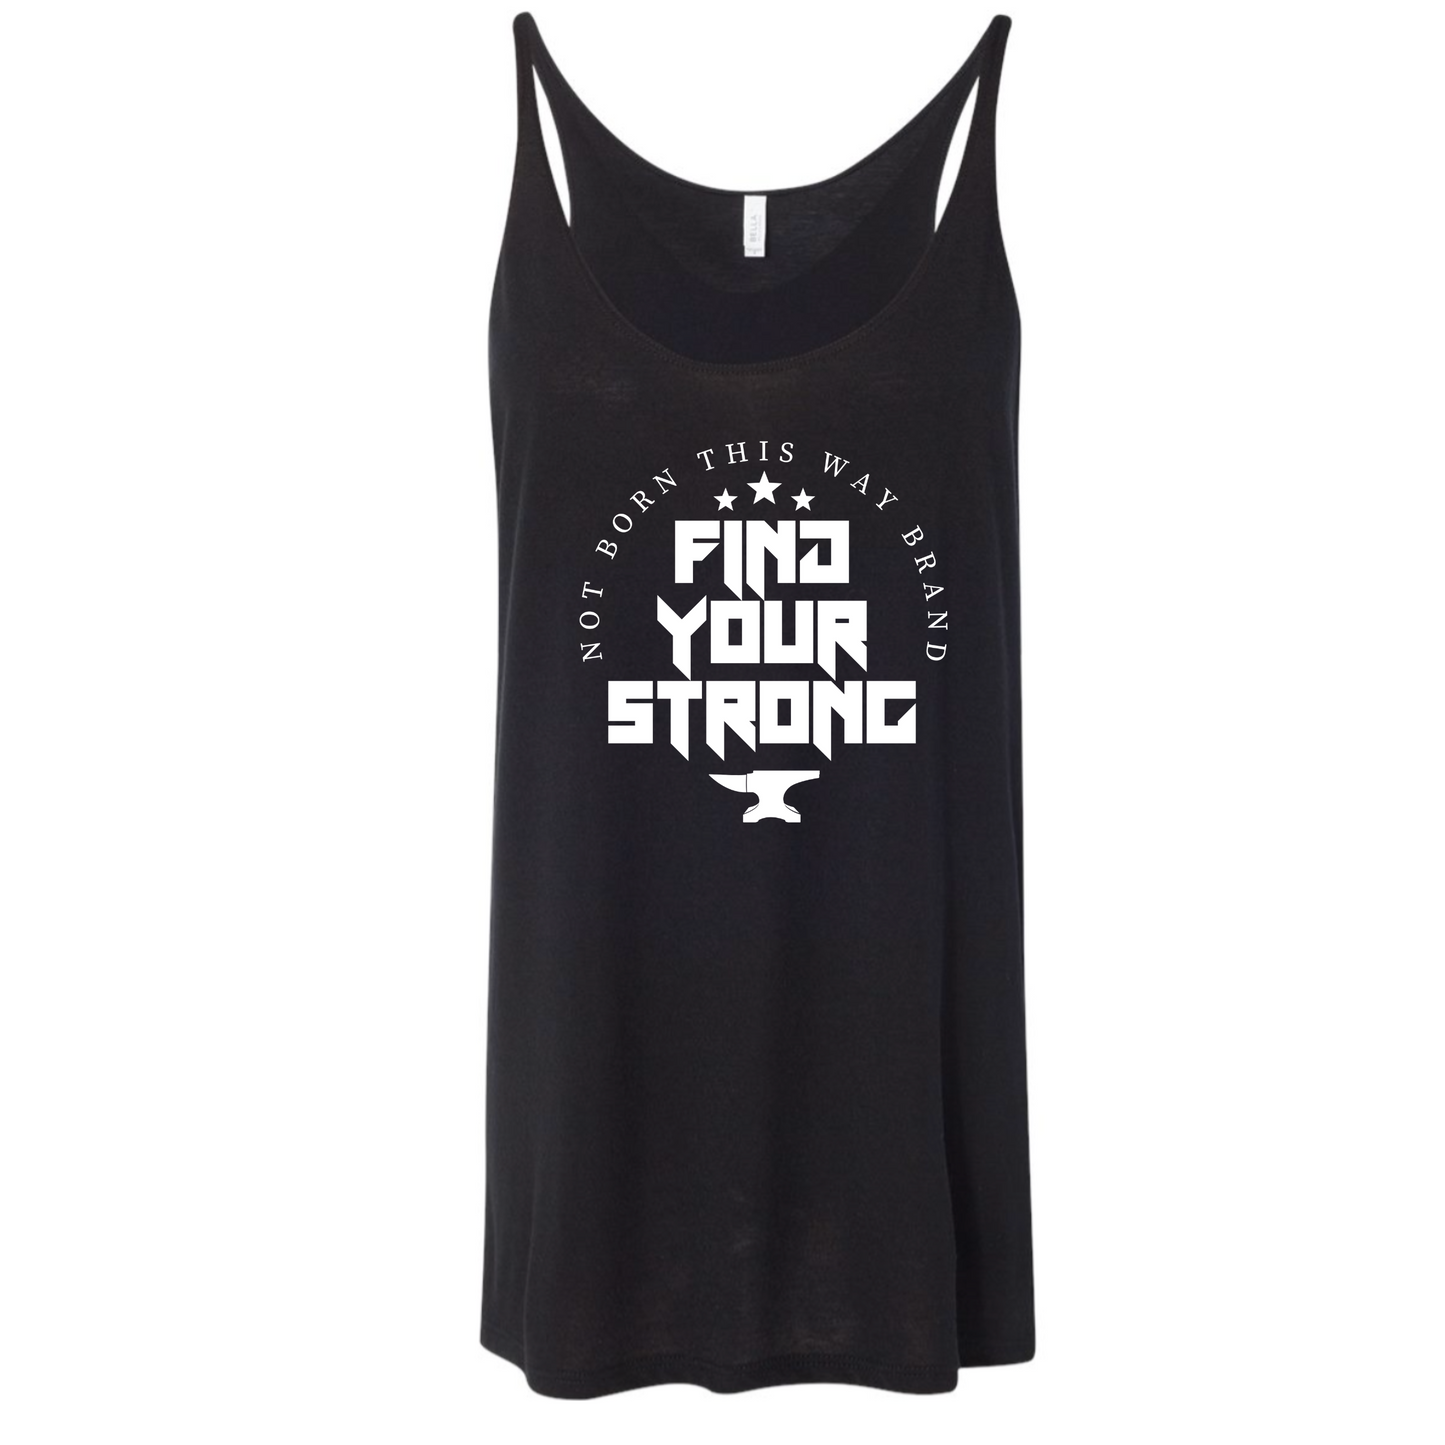 FIND YOUR STRONG - Women's Slouchy tank